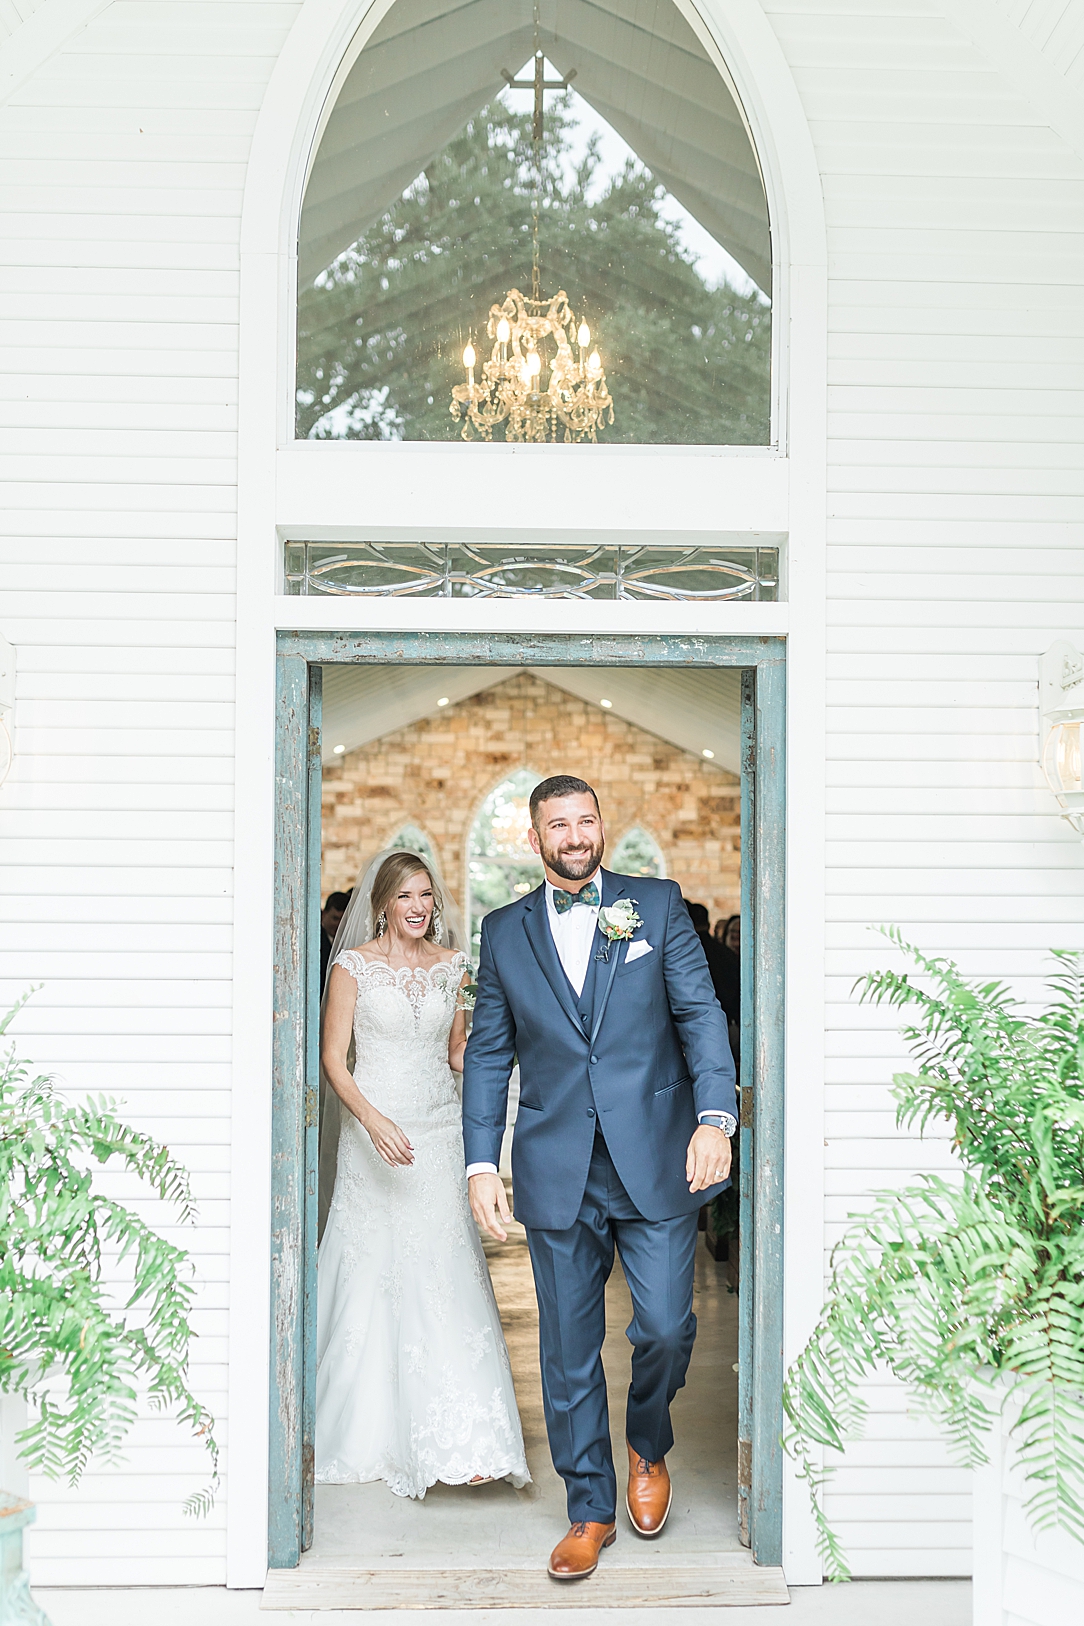 Fall Wedding at The Chandelier of Gruene in New Braunfels Texas by Allison Jeffers Photography 0078